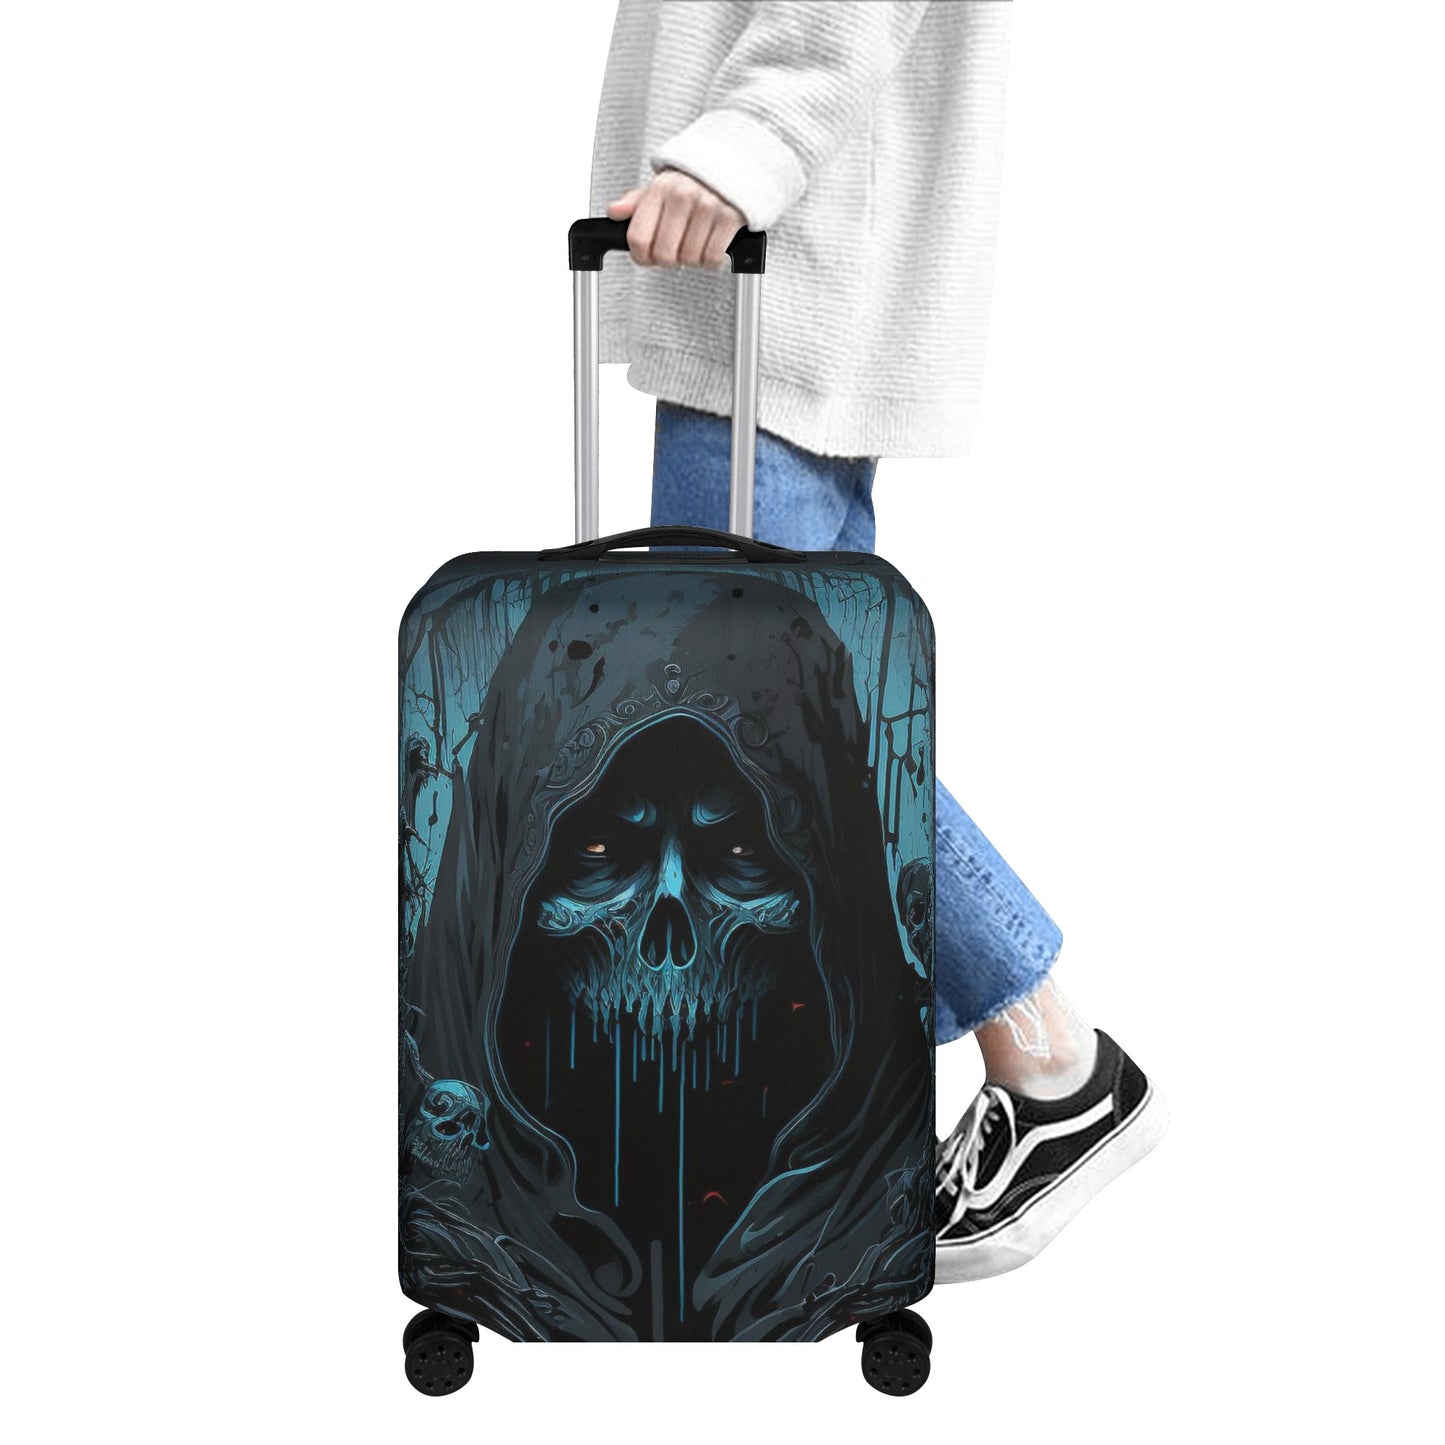 Gothic skull luggage tag, rose skull luggage cover set, punisher skull suitcase cover, evil suitcase tag, gothic skull suitcase protector, m Luggage Cover